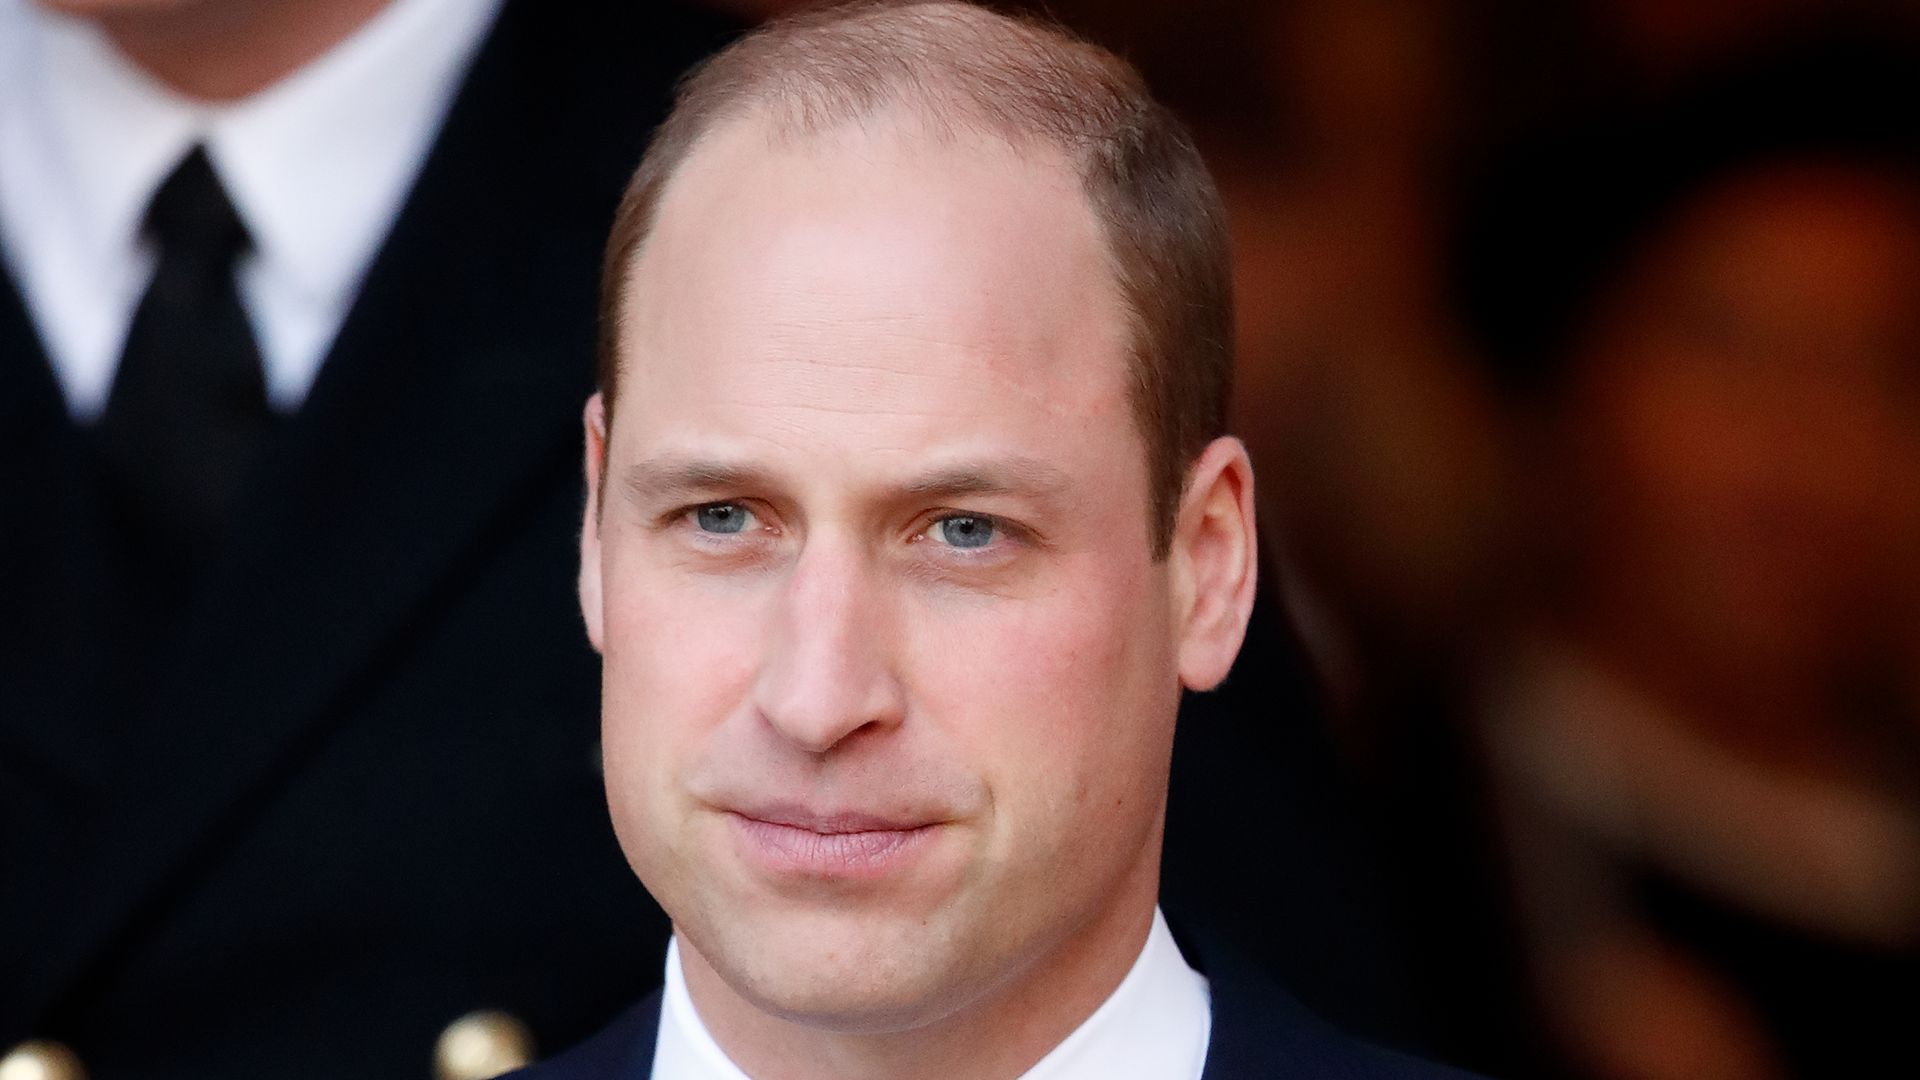 Prince William in navy suit 